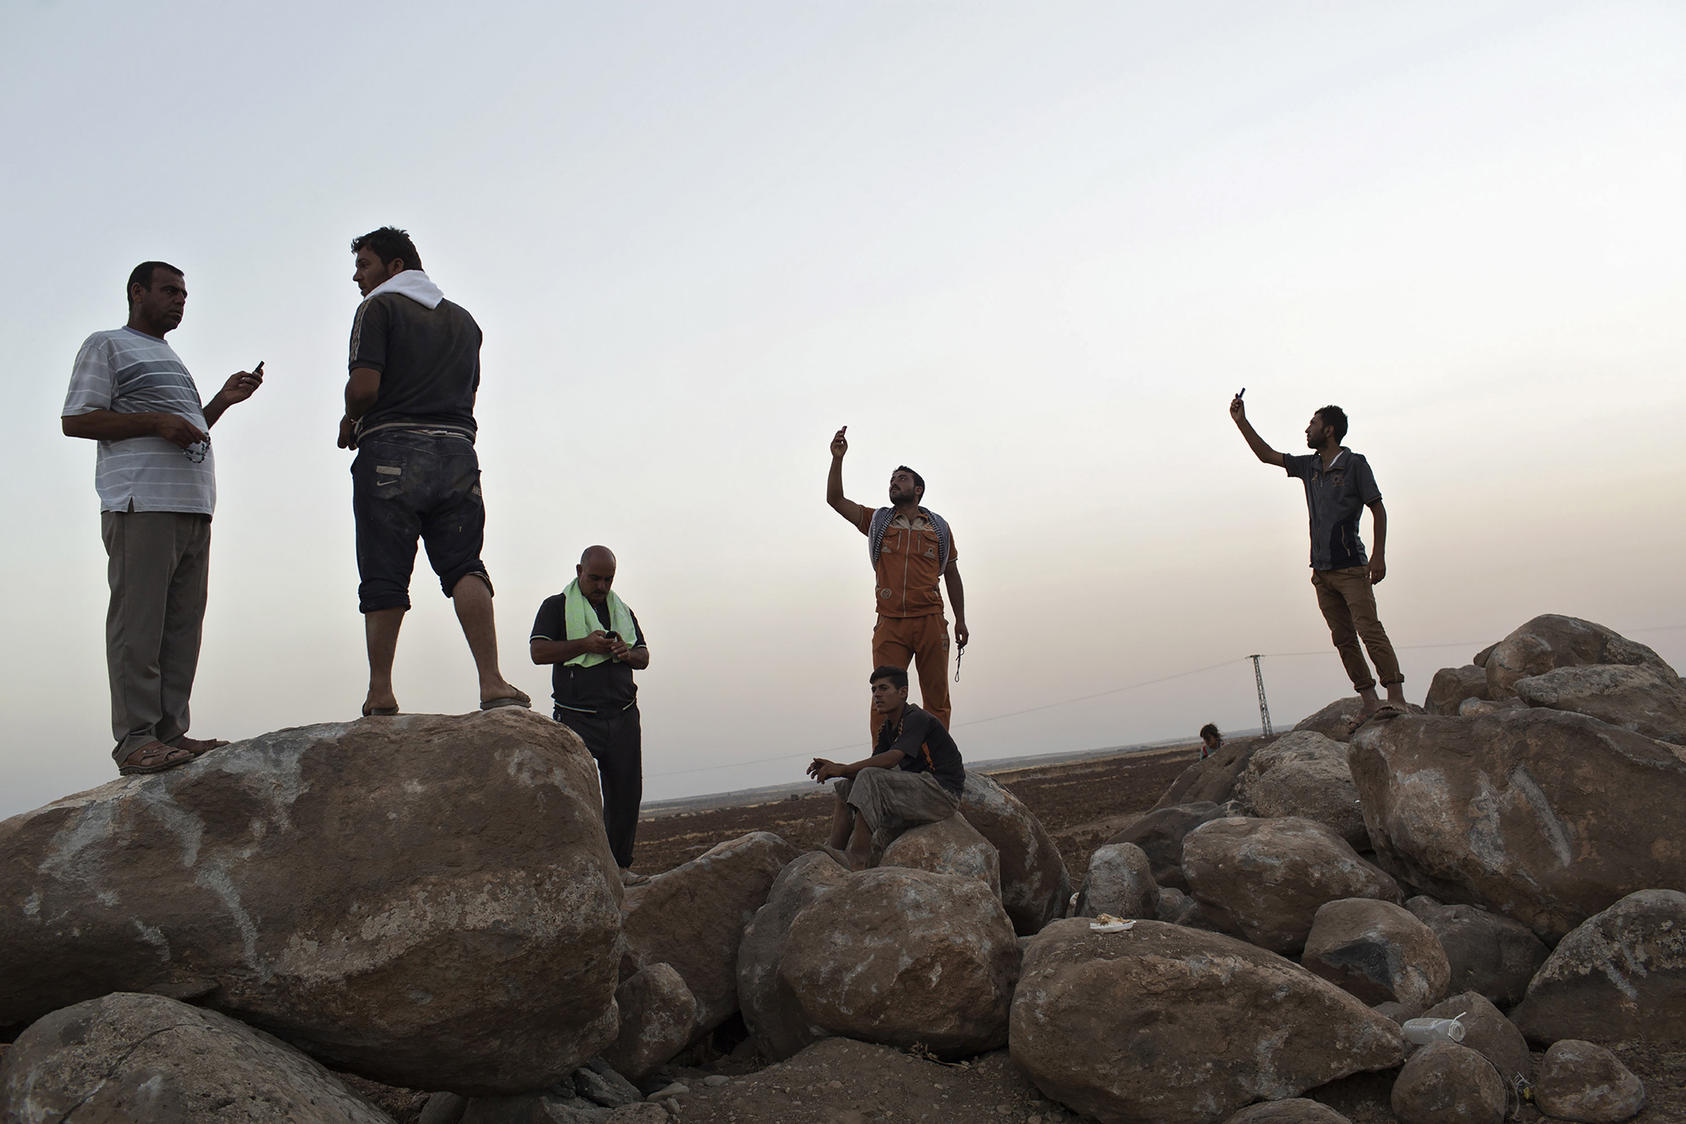 Iraqi Yazidis try to get better cell phone reception from atop boulders at a refugee camp in Derik, Syria, Aug. 10, 2014. (Adam Ferguson/The New York Times)